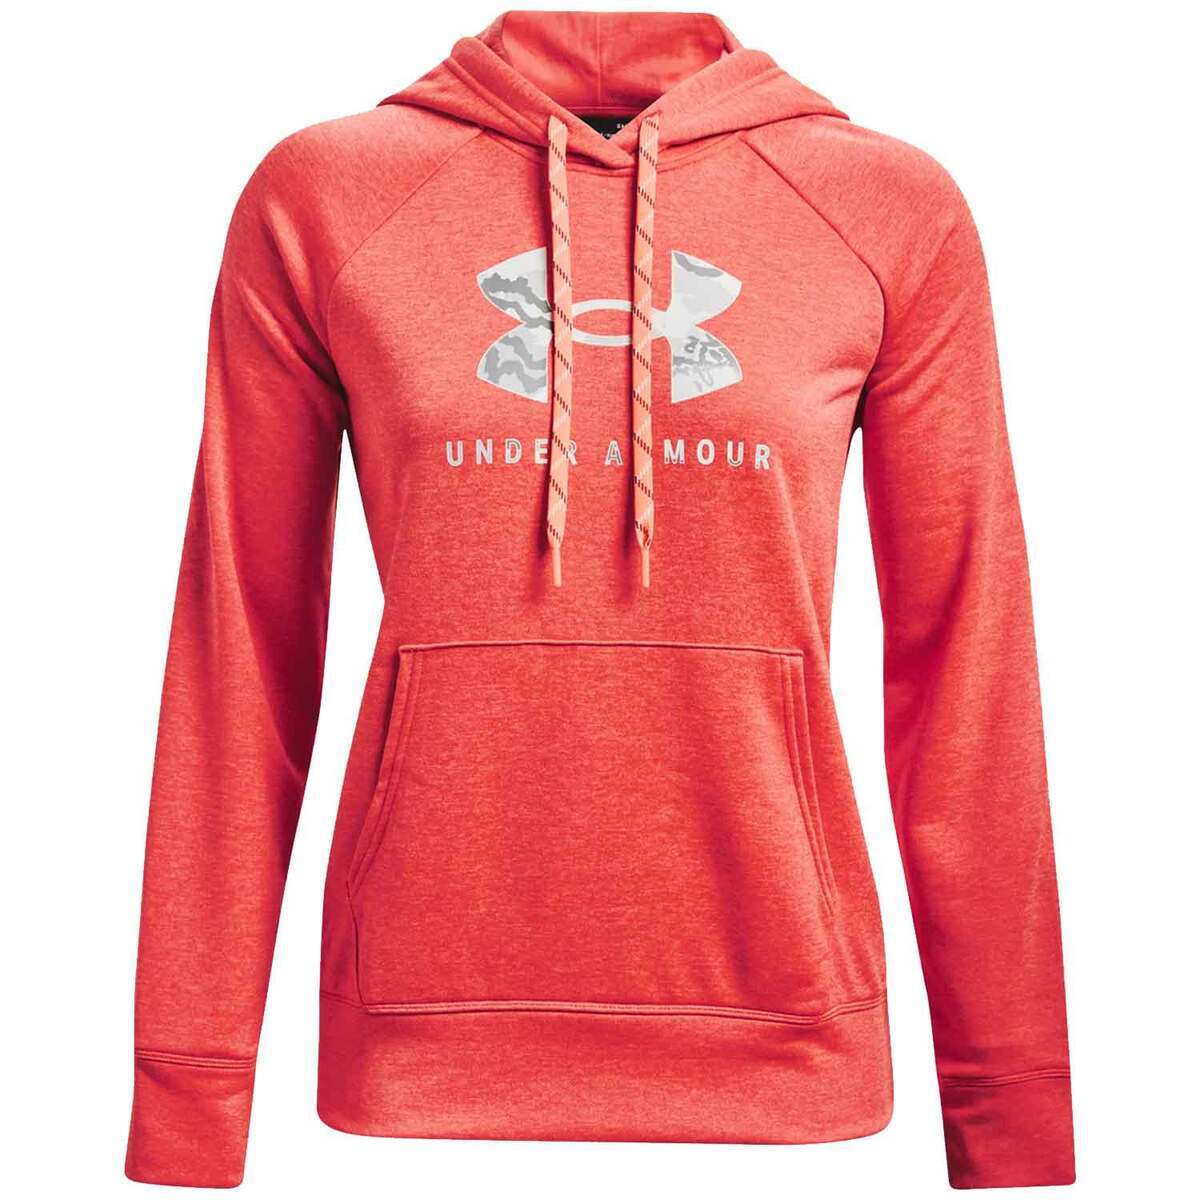 Under Armour Women's Shoreline Terry Casual Hoodie - Electric Tangerine ...